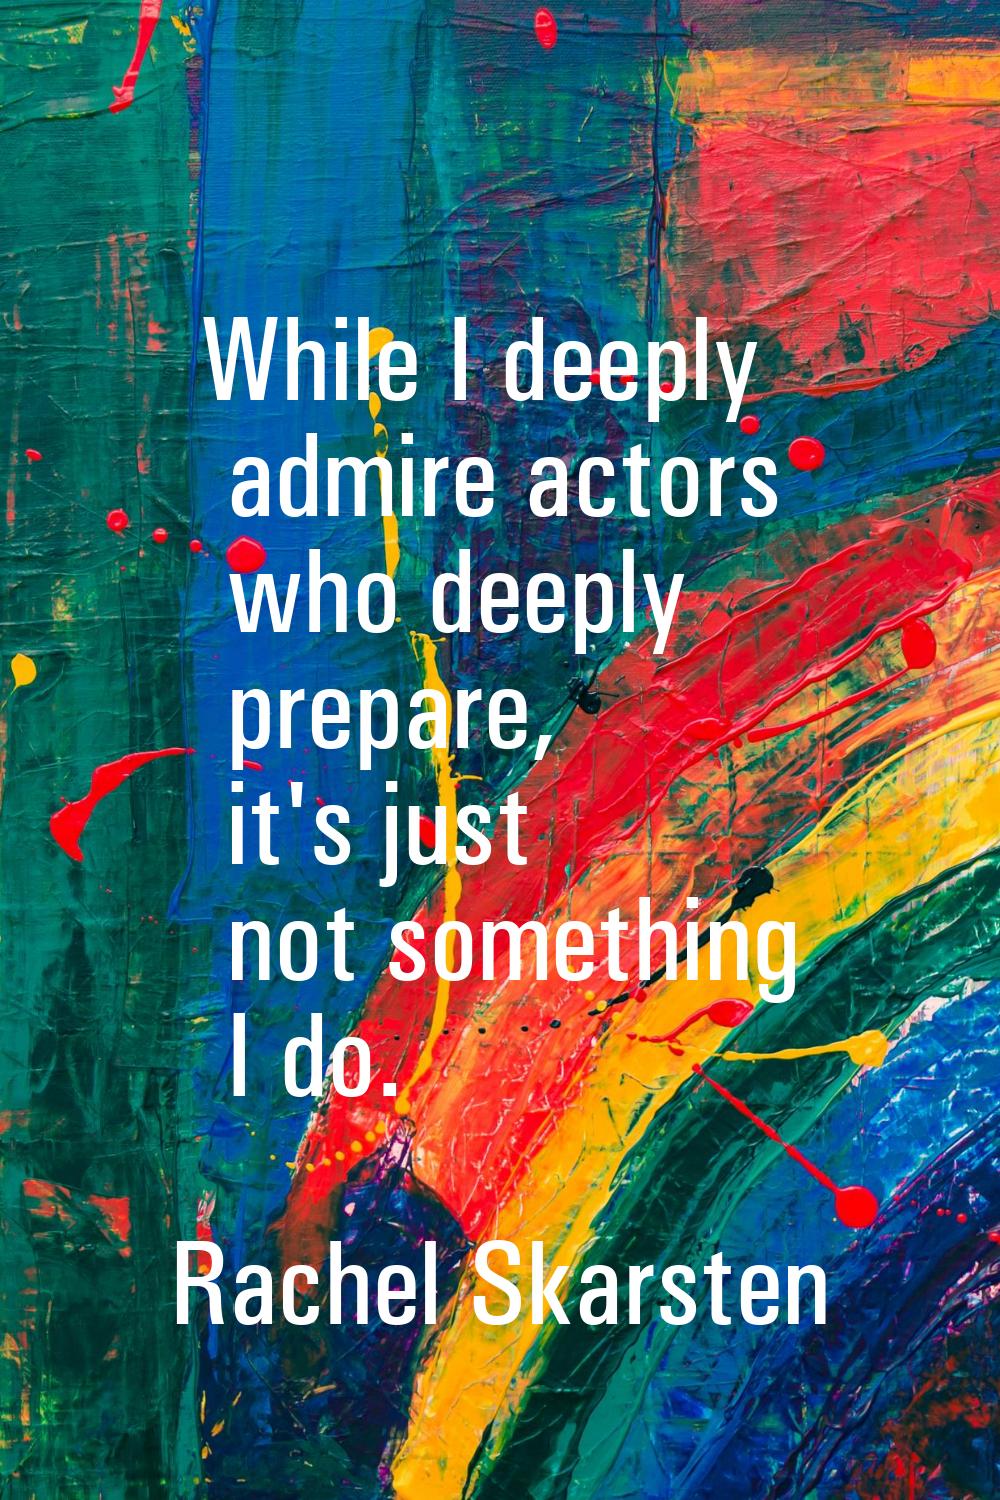 While I deeply admire actors who deeply prepare, it's just not something I do.